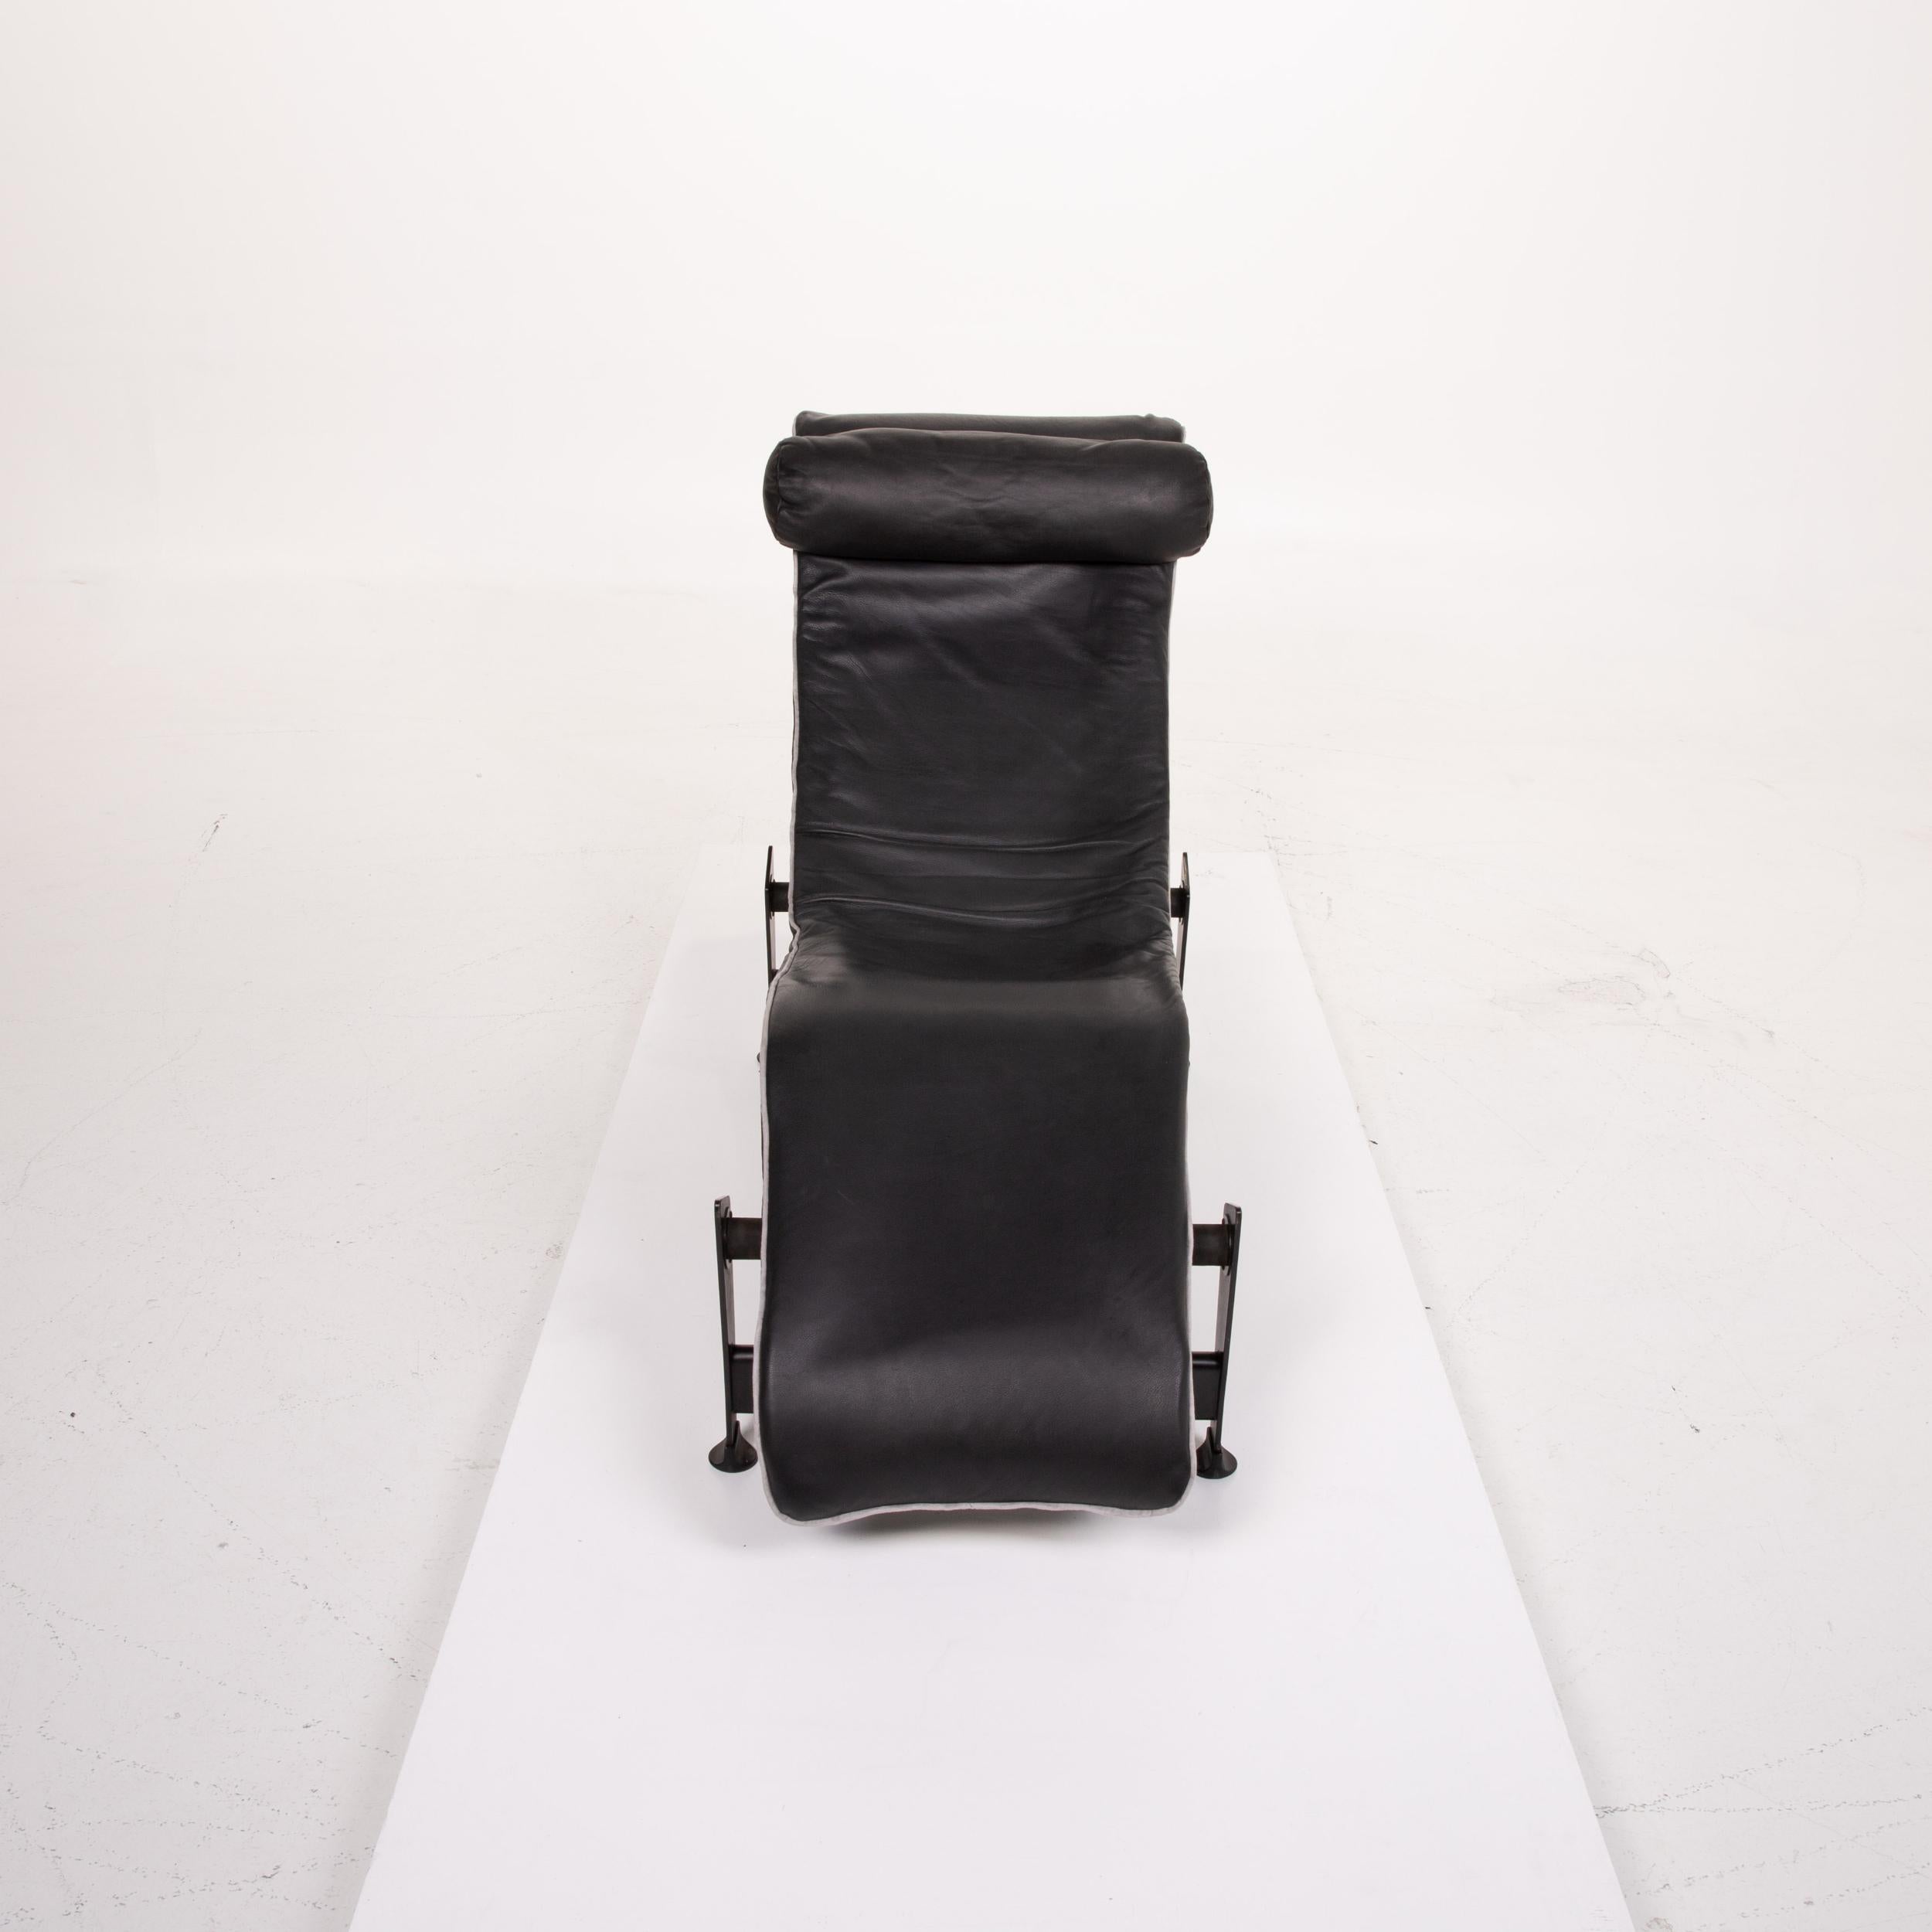 Cassina Le Corbusier LC 4 Leather Lounger Black Relaxation Function Relaxation 4